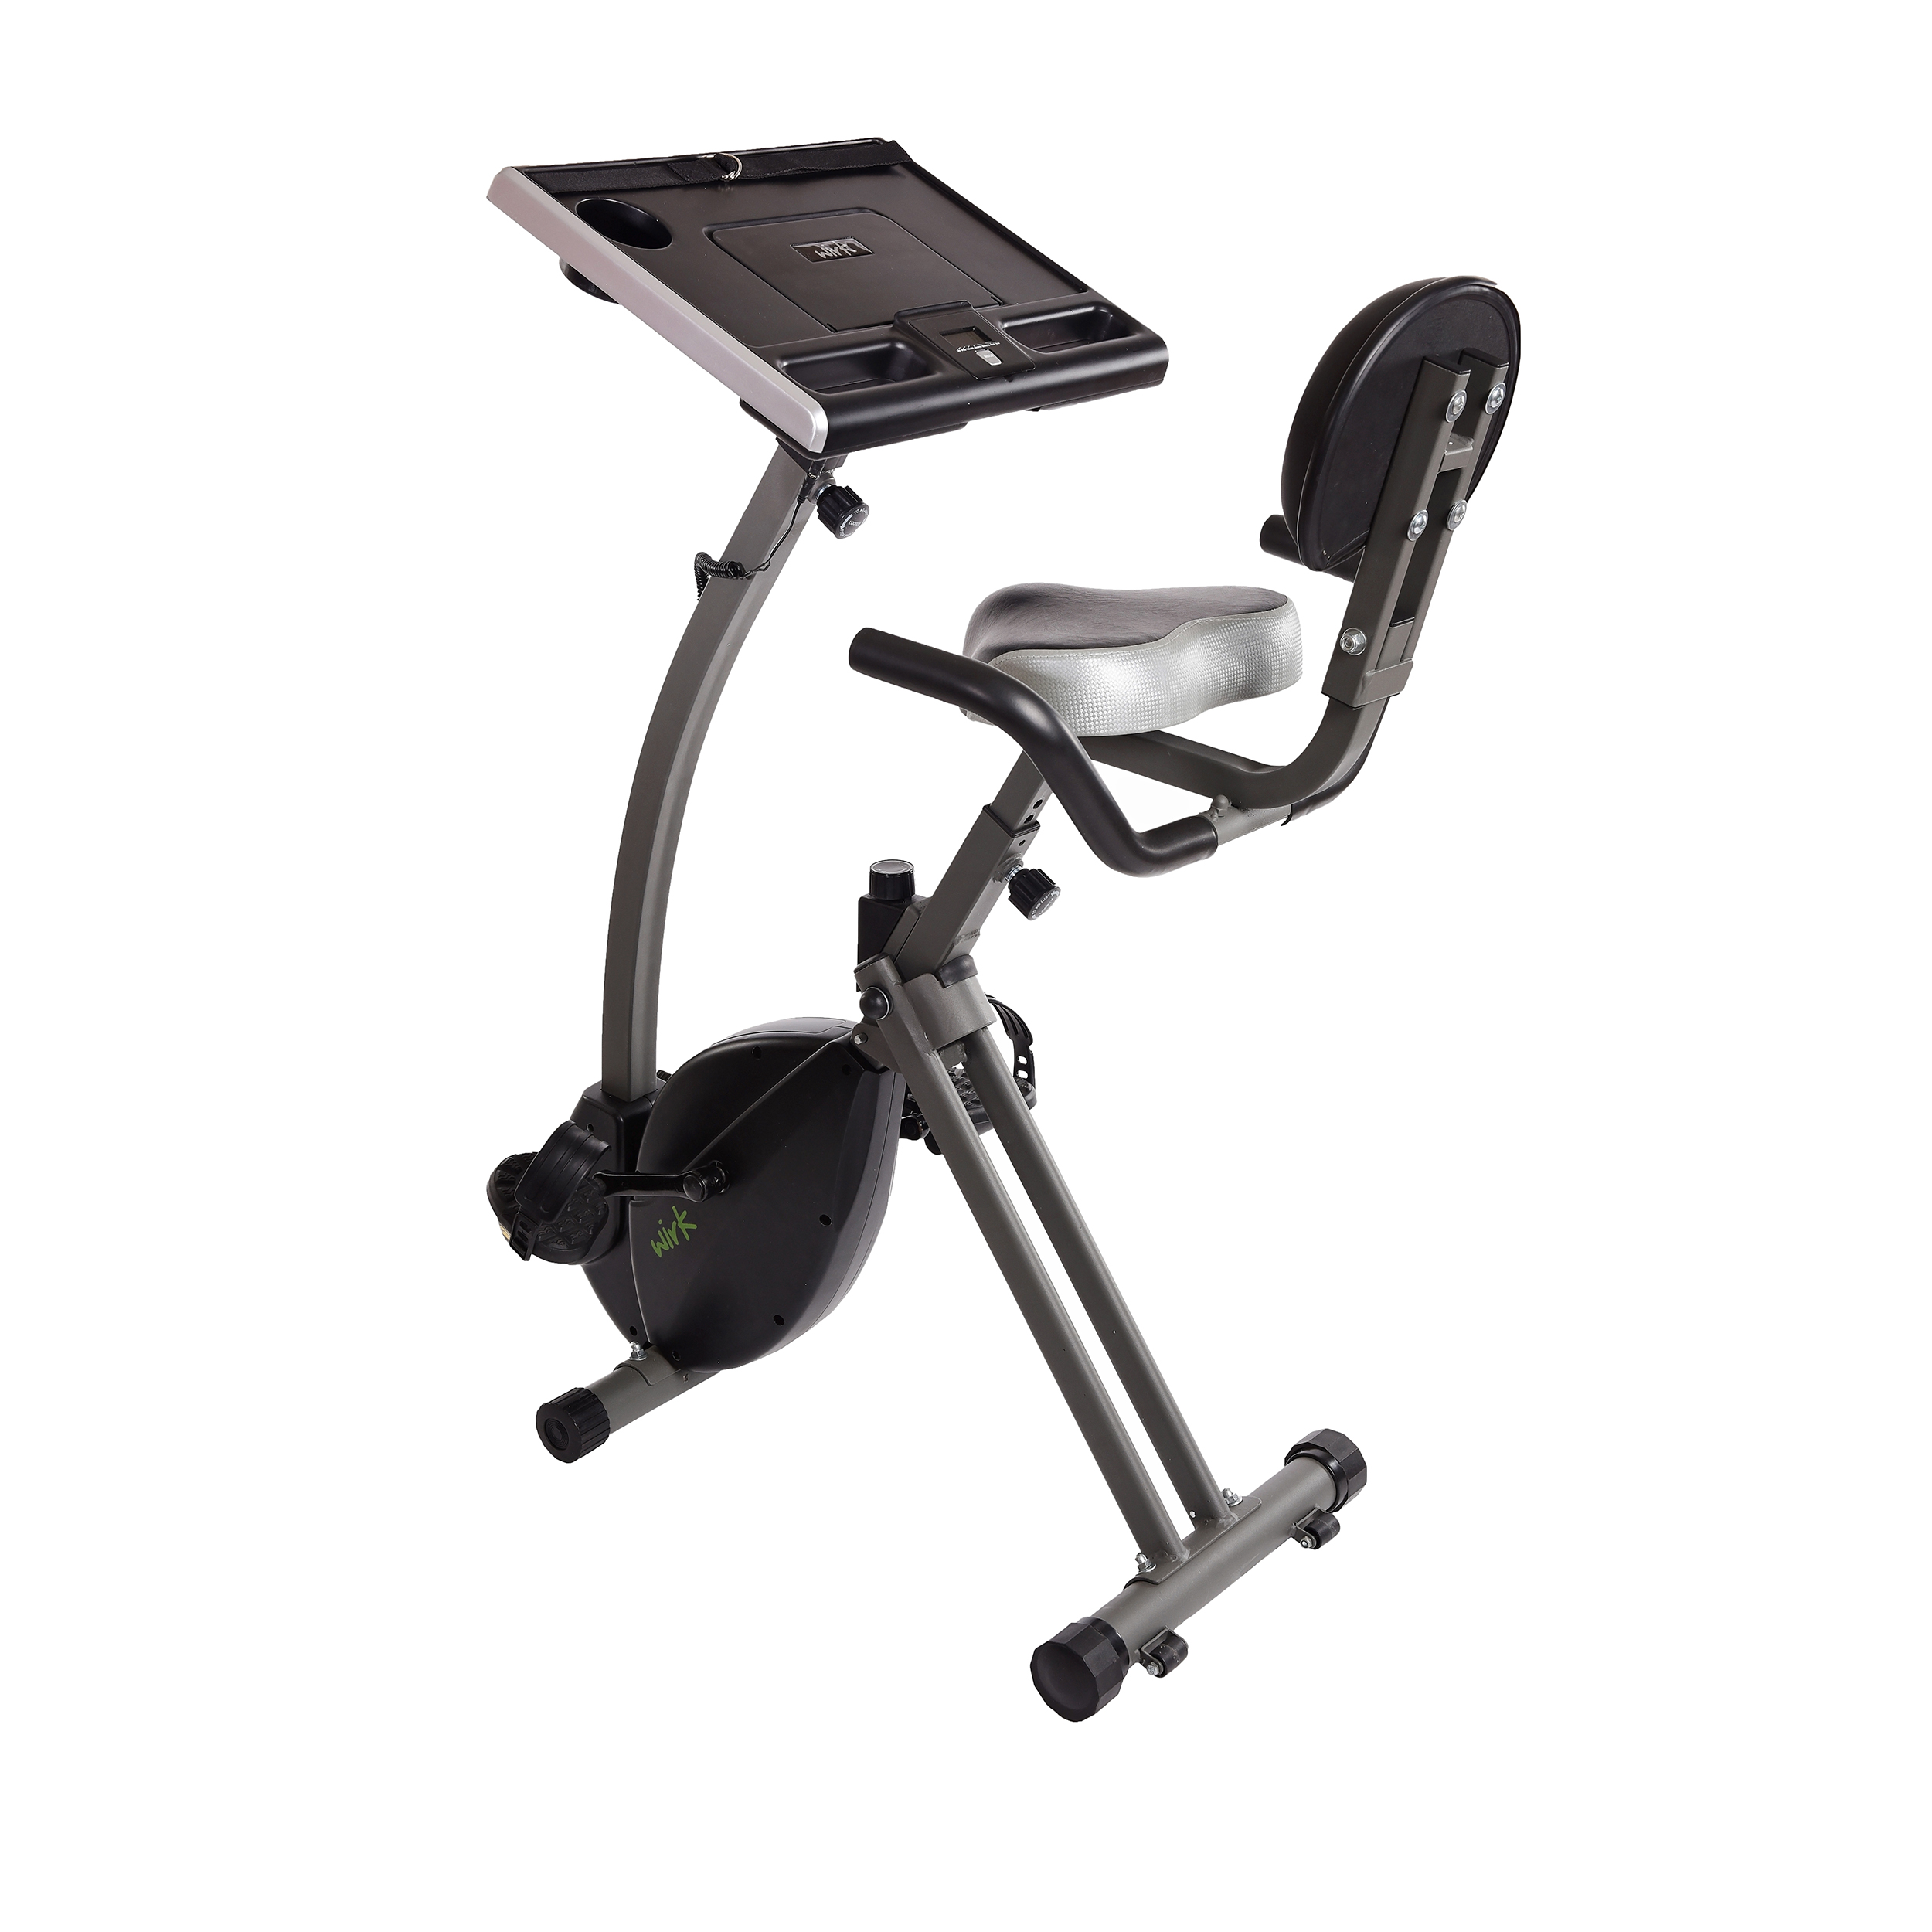 Wirk Ride Exercise Bike Workstation and Standing Desk from Stamina Products